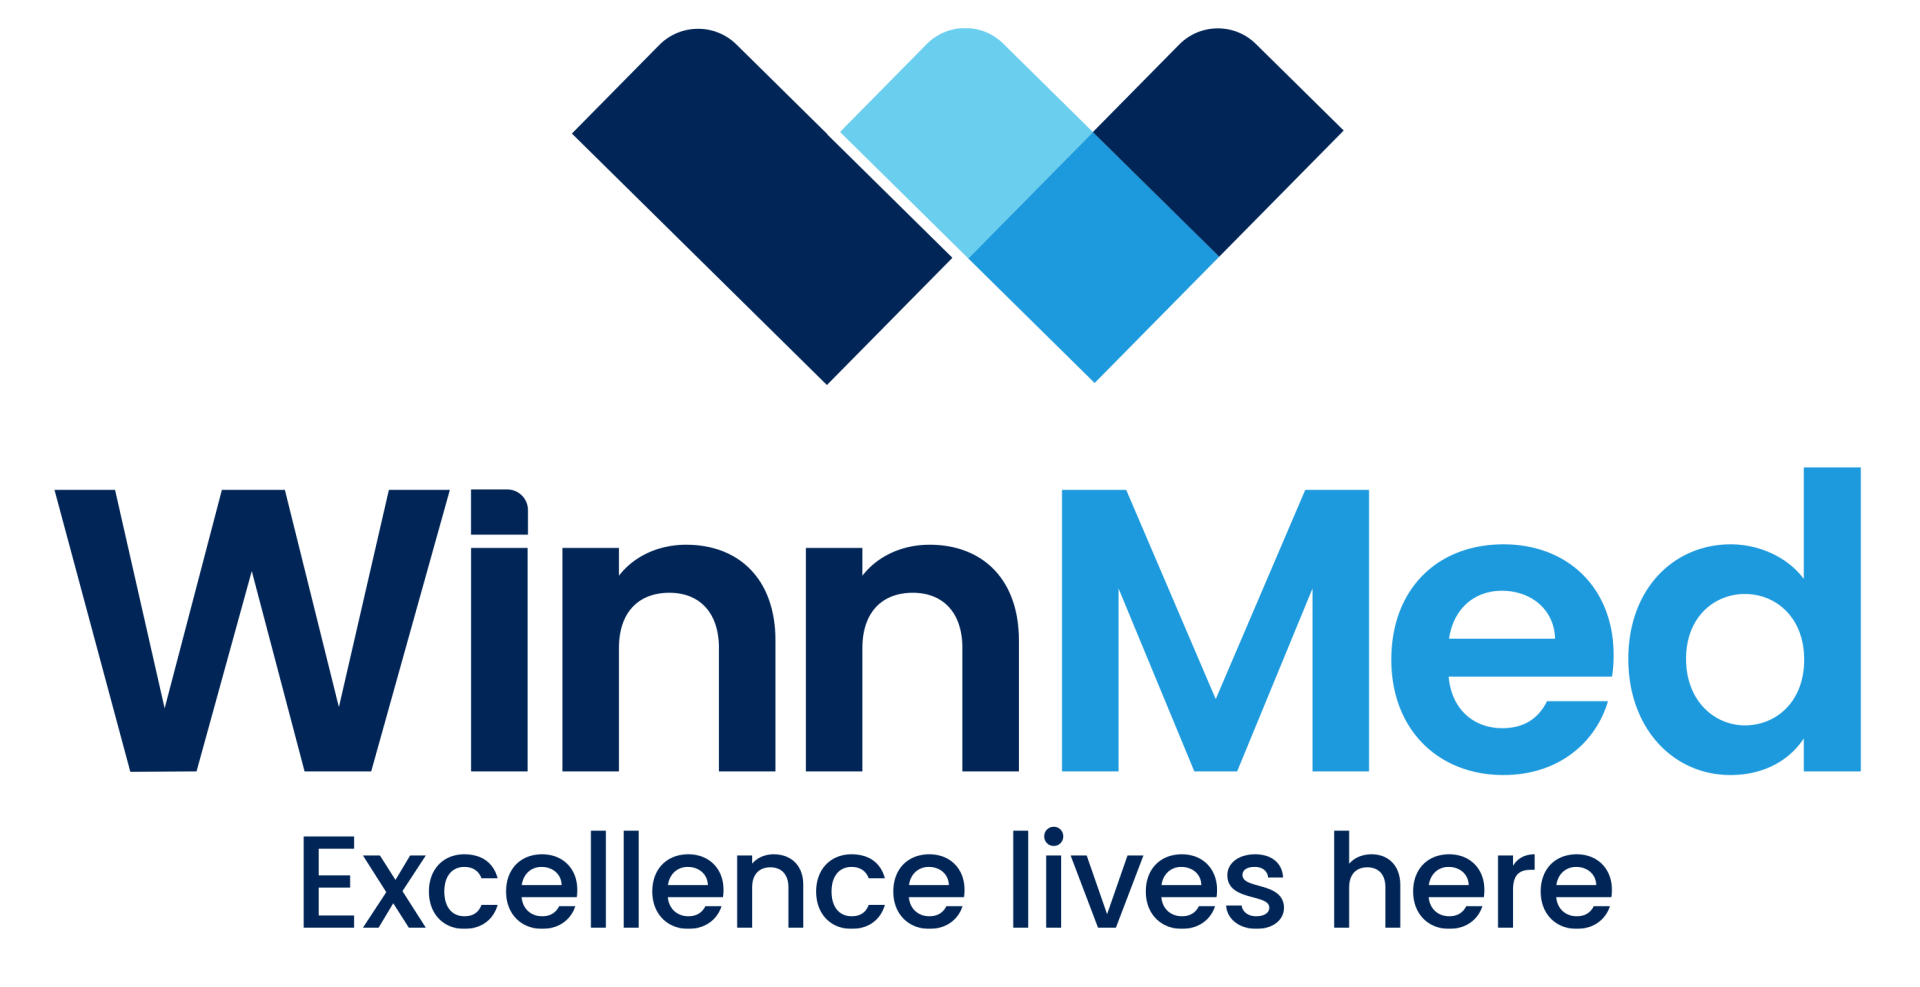 Color version of WinnMed logo stacked with excellence lives here tagline, both created by Vendi Advertising